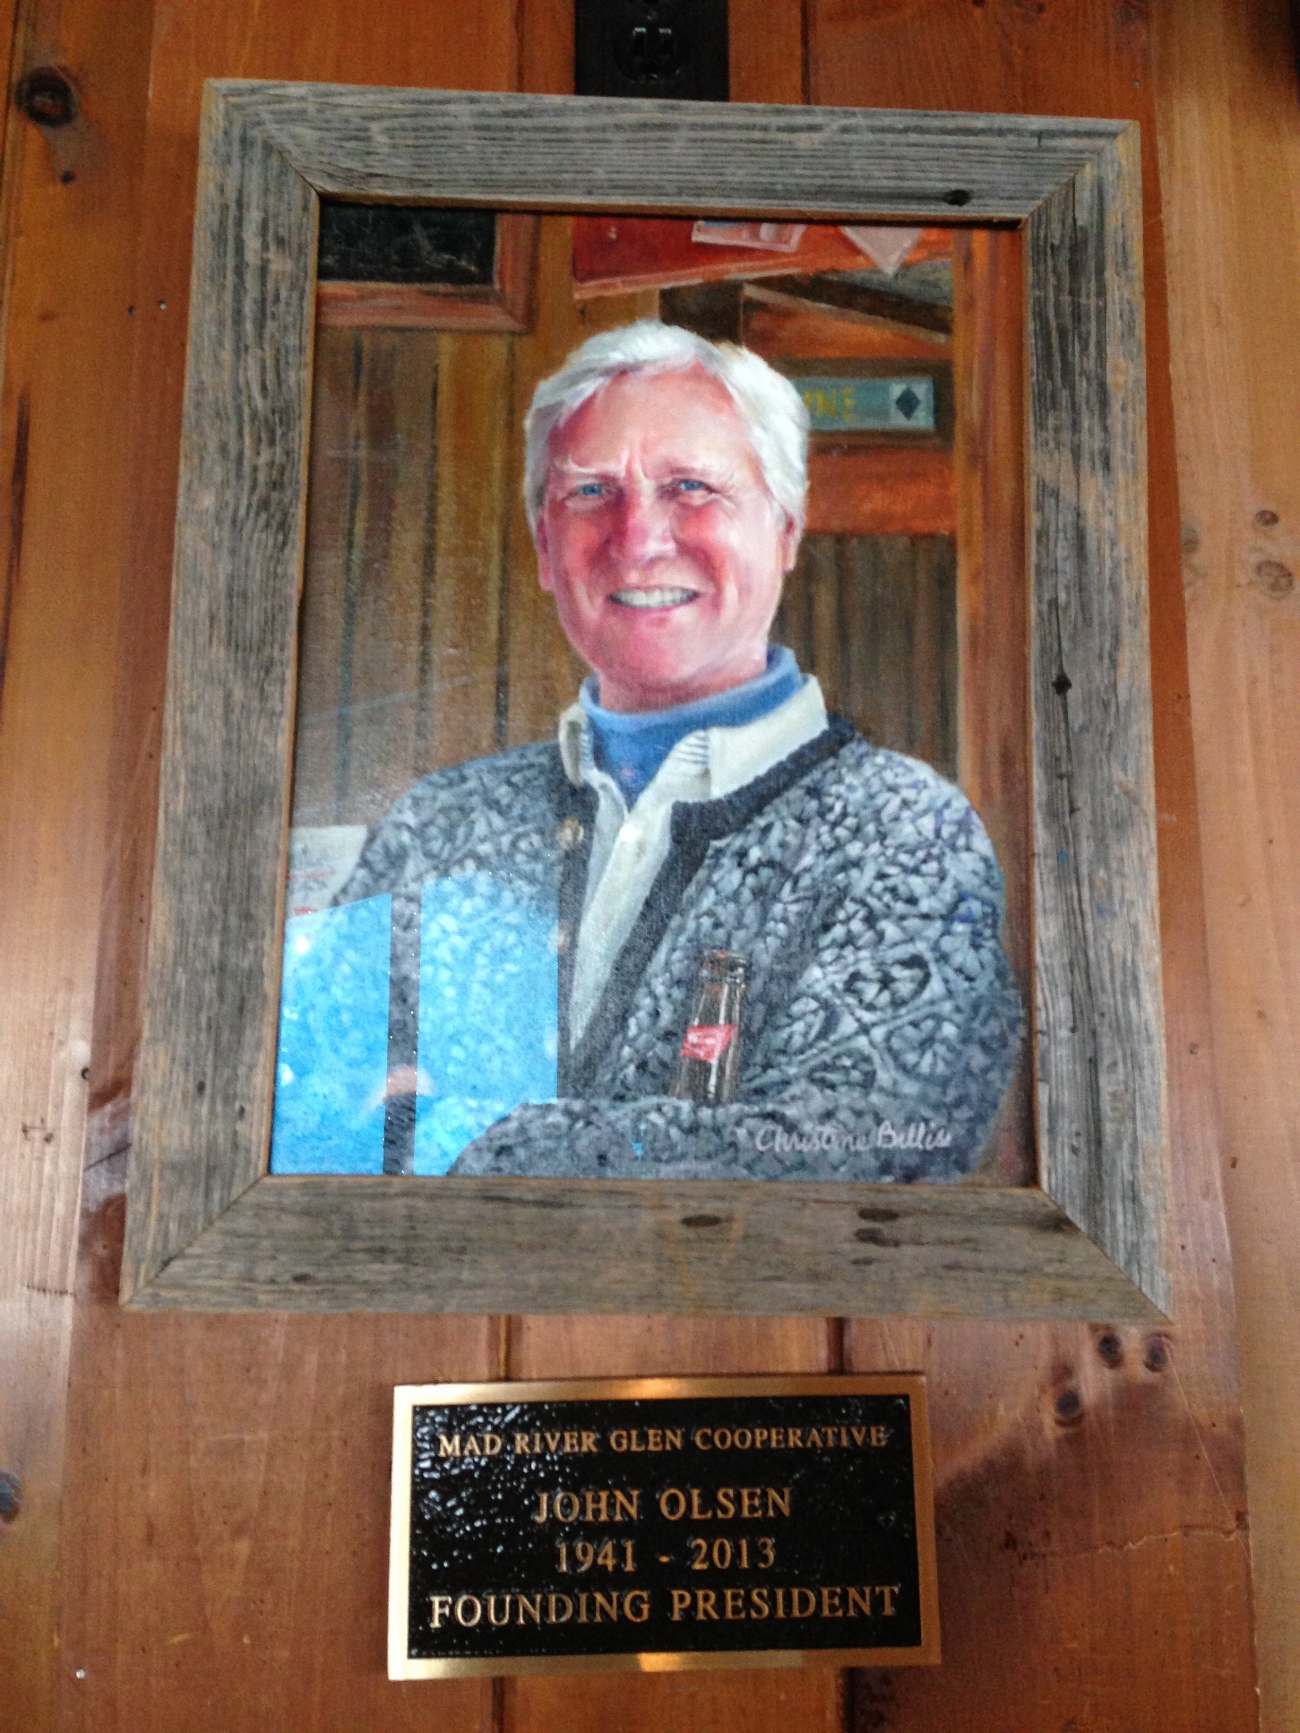  A Portrait of John Olsen, original owner and builder of what is now The Warren House, hangs in the bar of Mad River Glen in honor of his contributions to founding the skier-owned mountain 